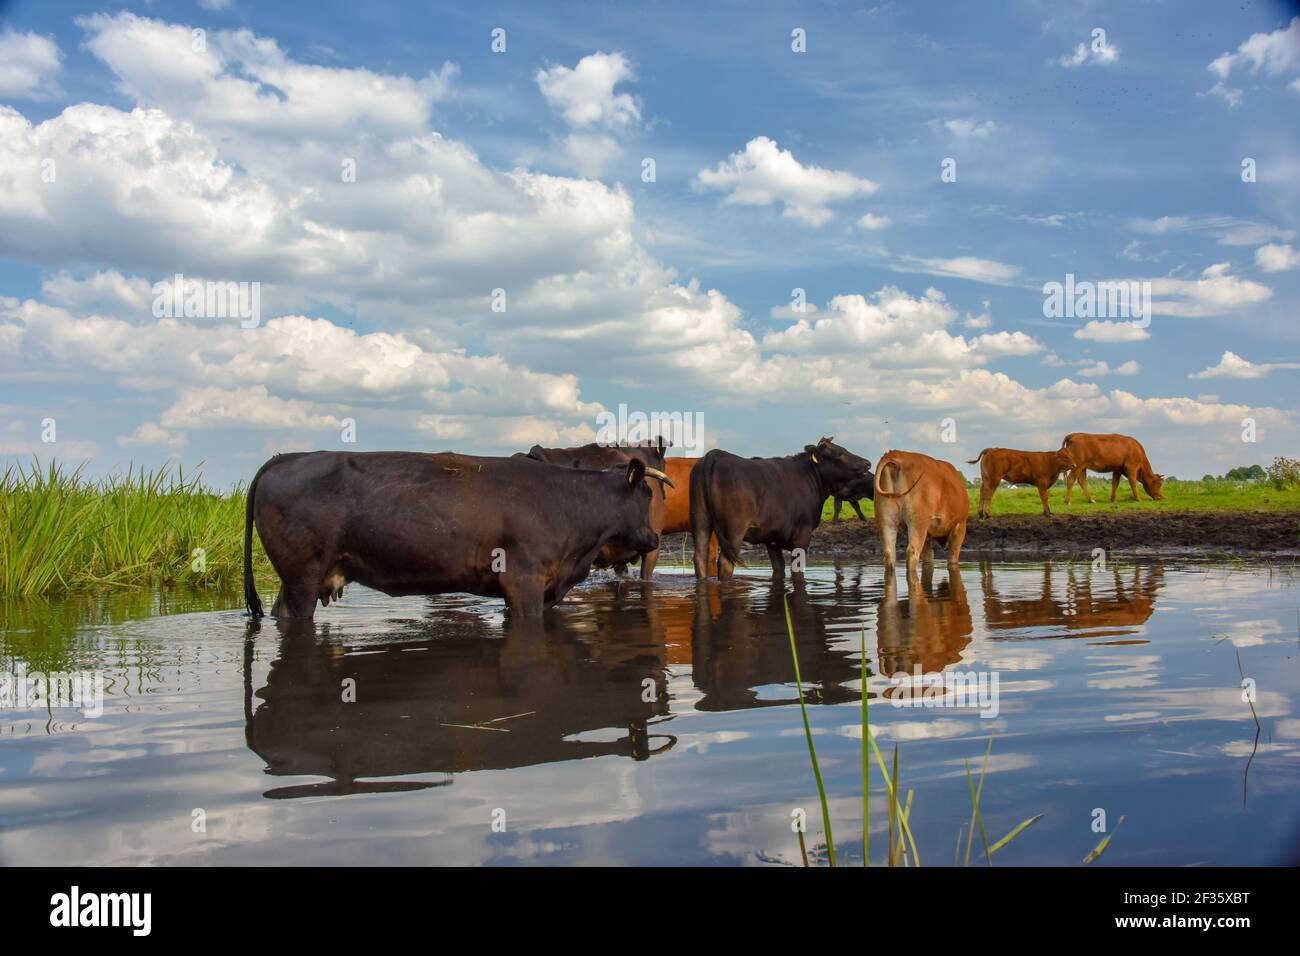 Cows standing in a pond on a meadow. Animals reflection in water Stock Photo